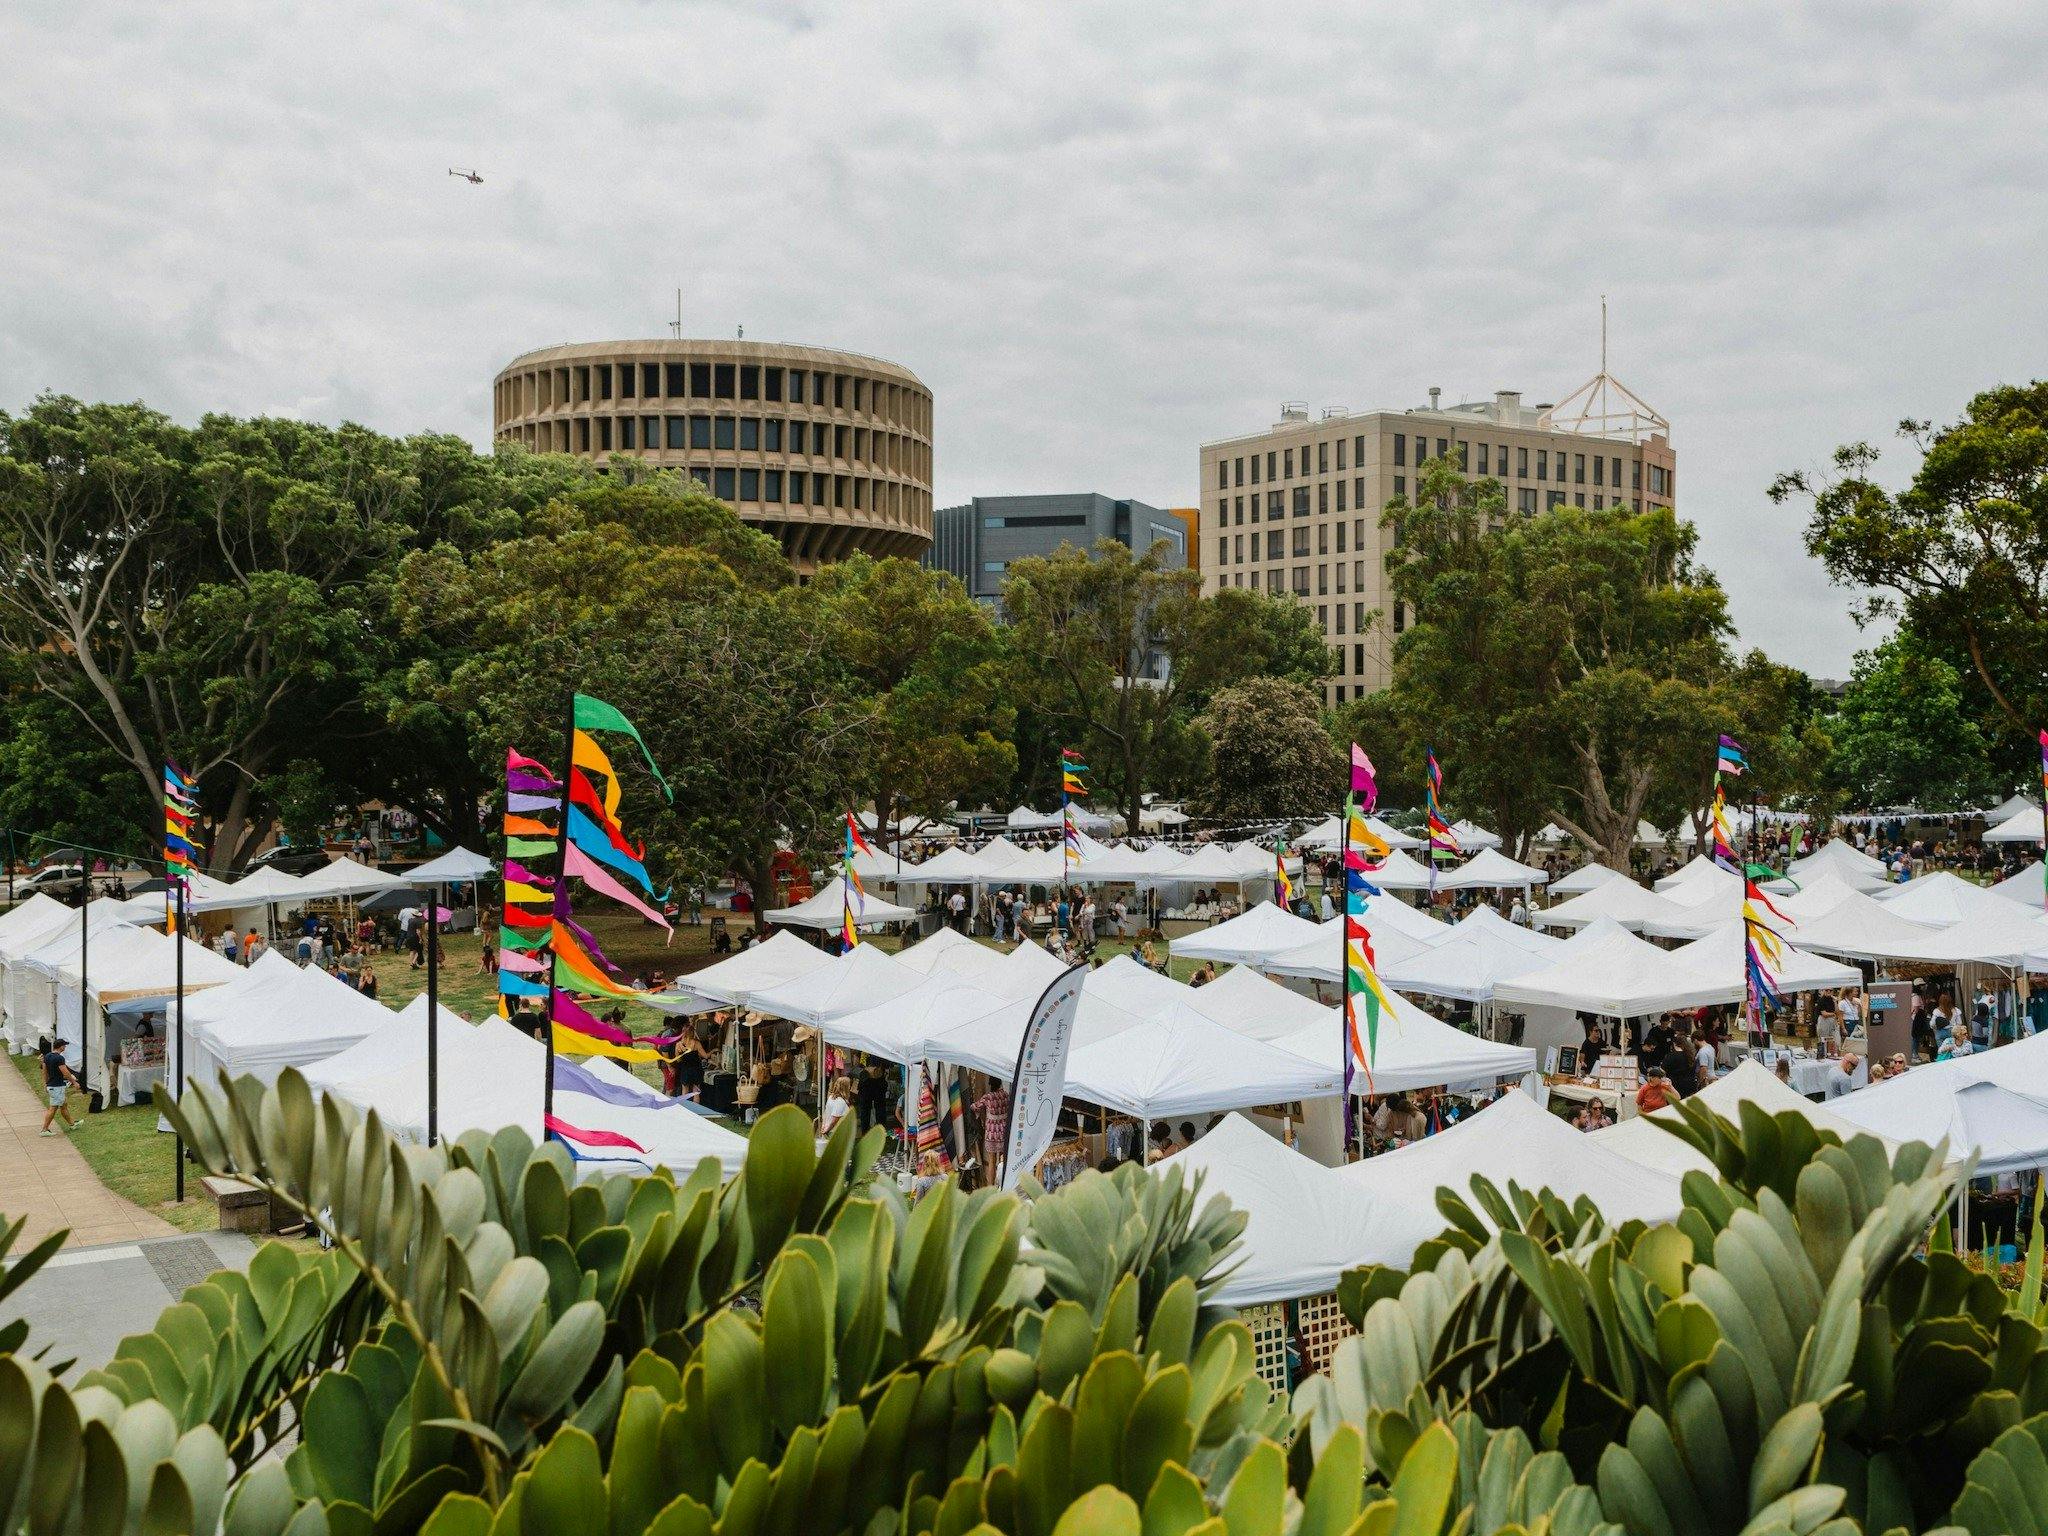 Olive Tree Market is held in the cultural precinct of Newcastle and features over 130 stalls